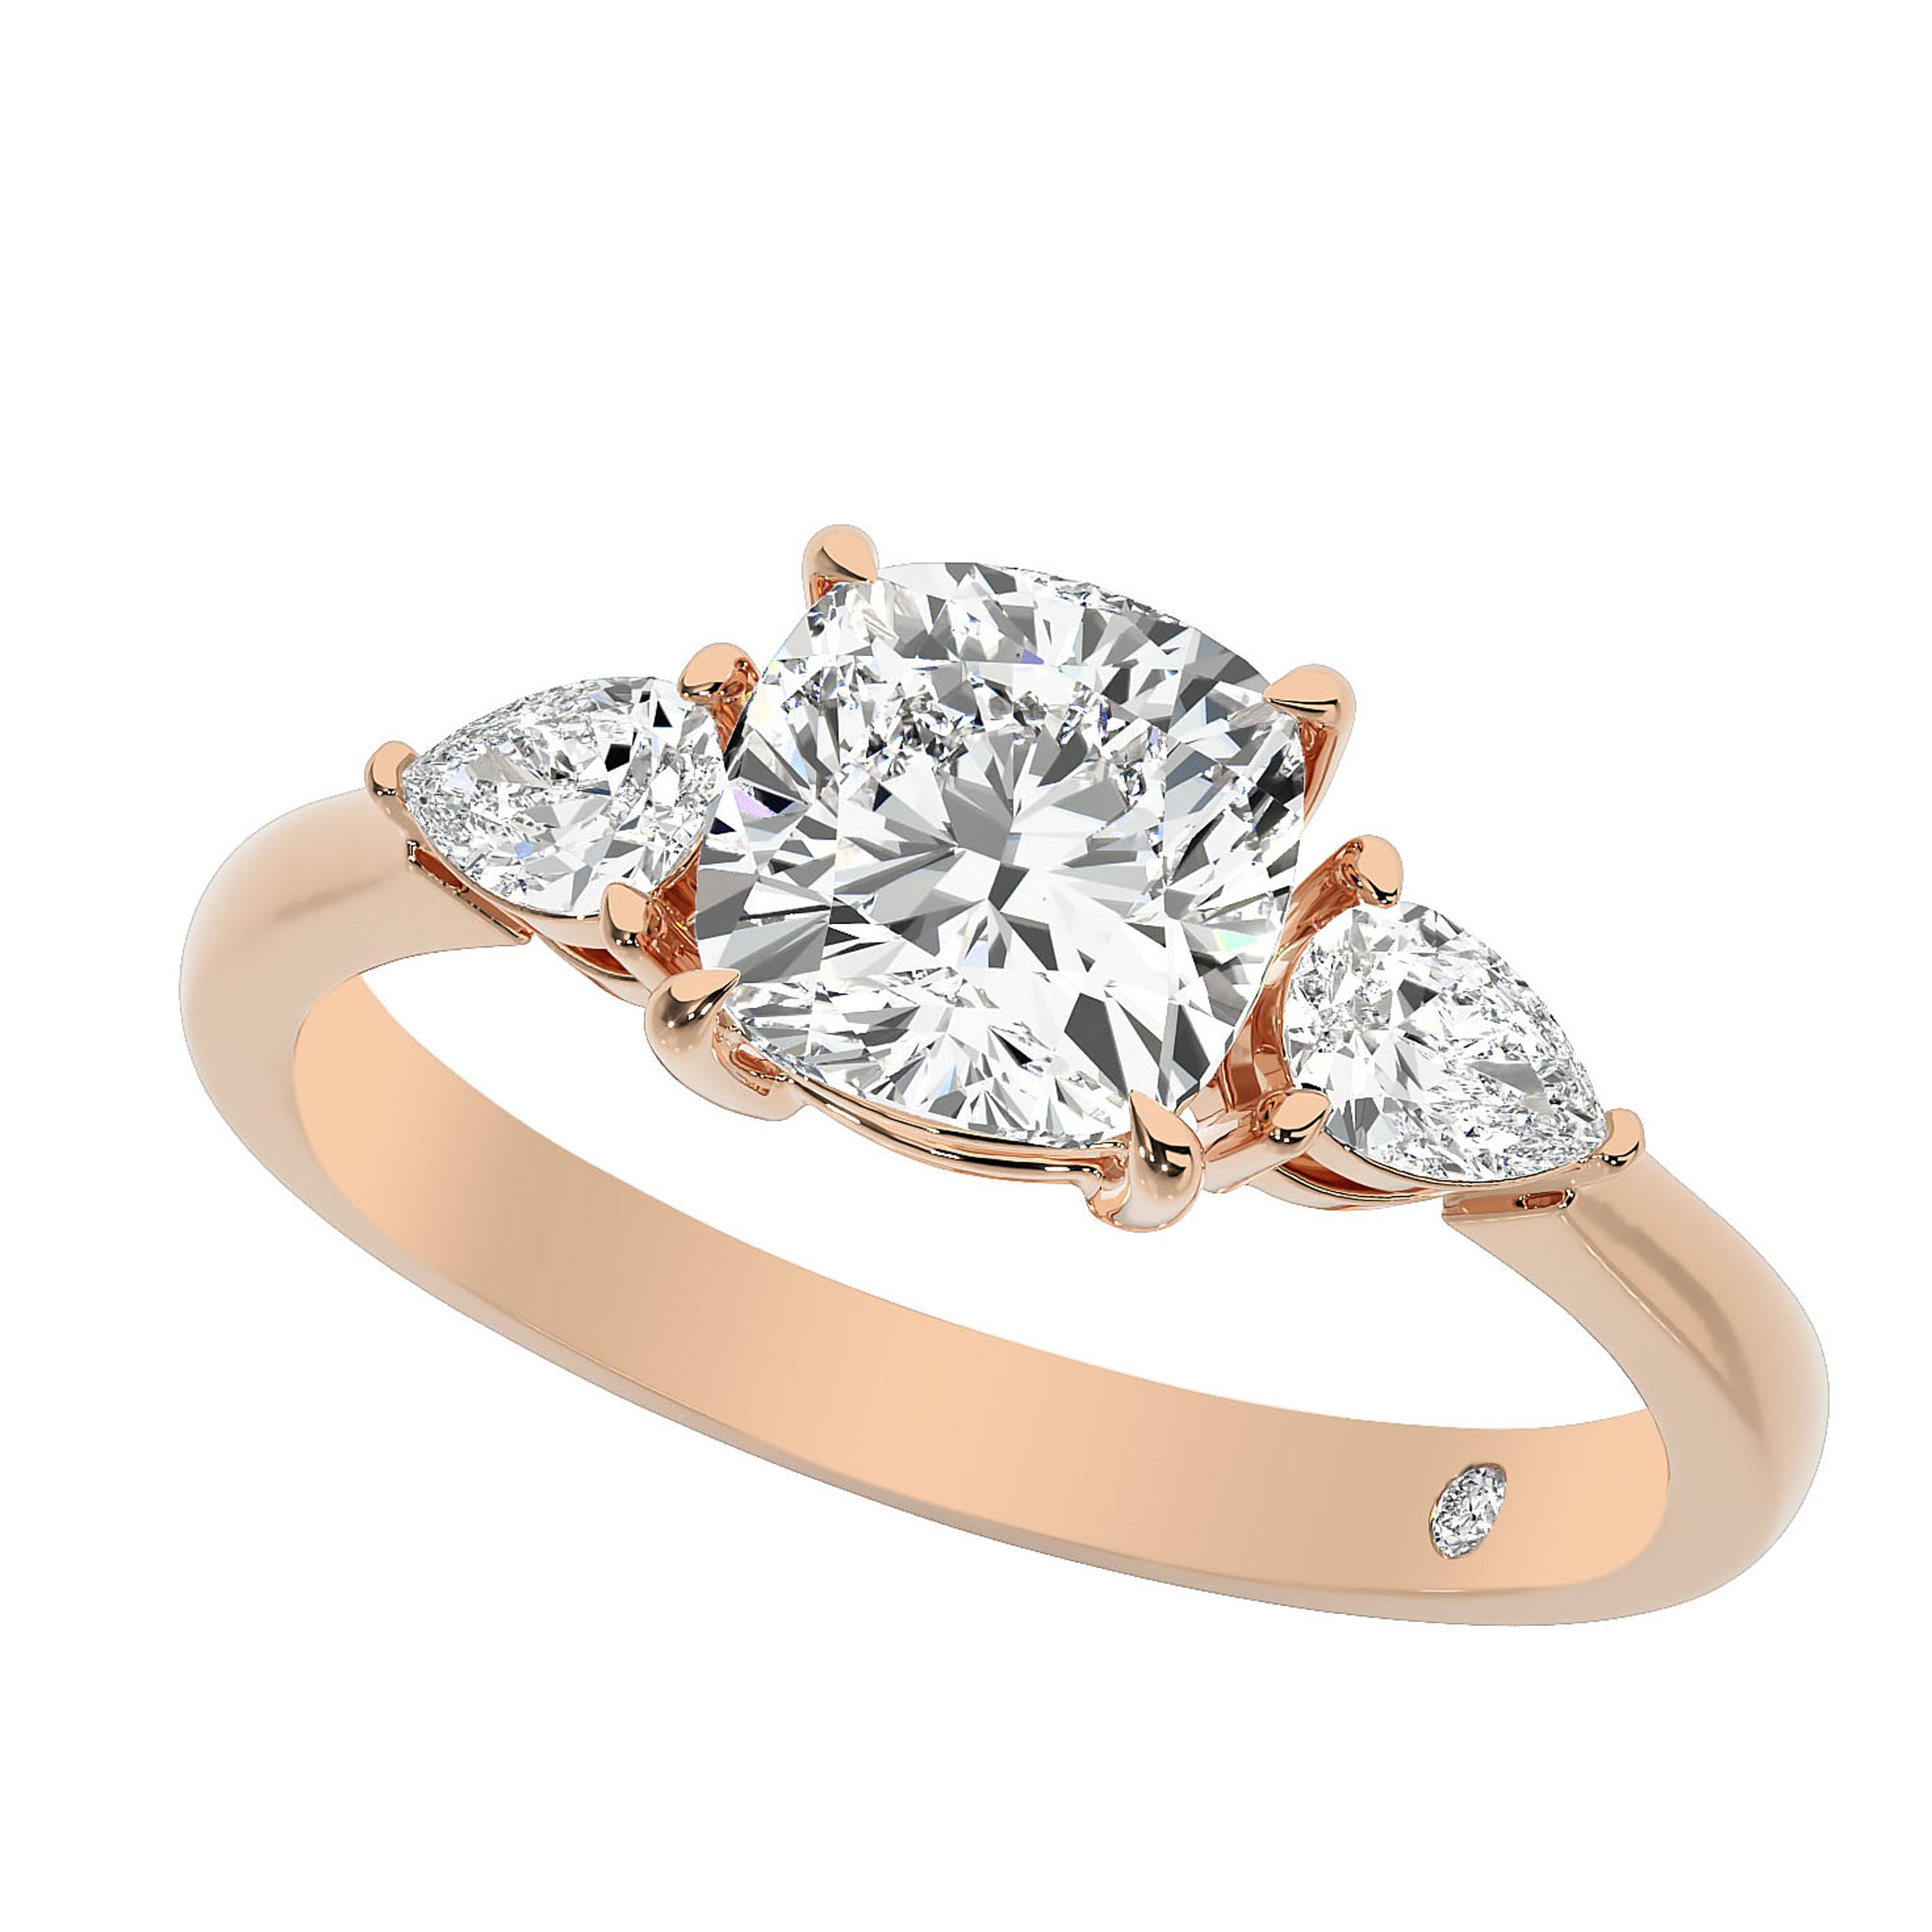 Michelle Cushion Engagement Ring